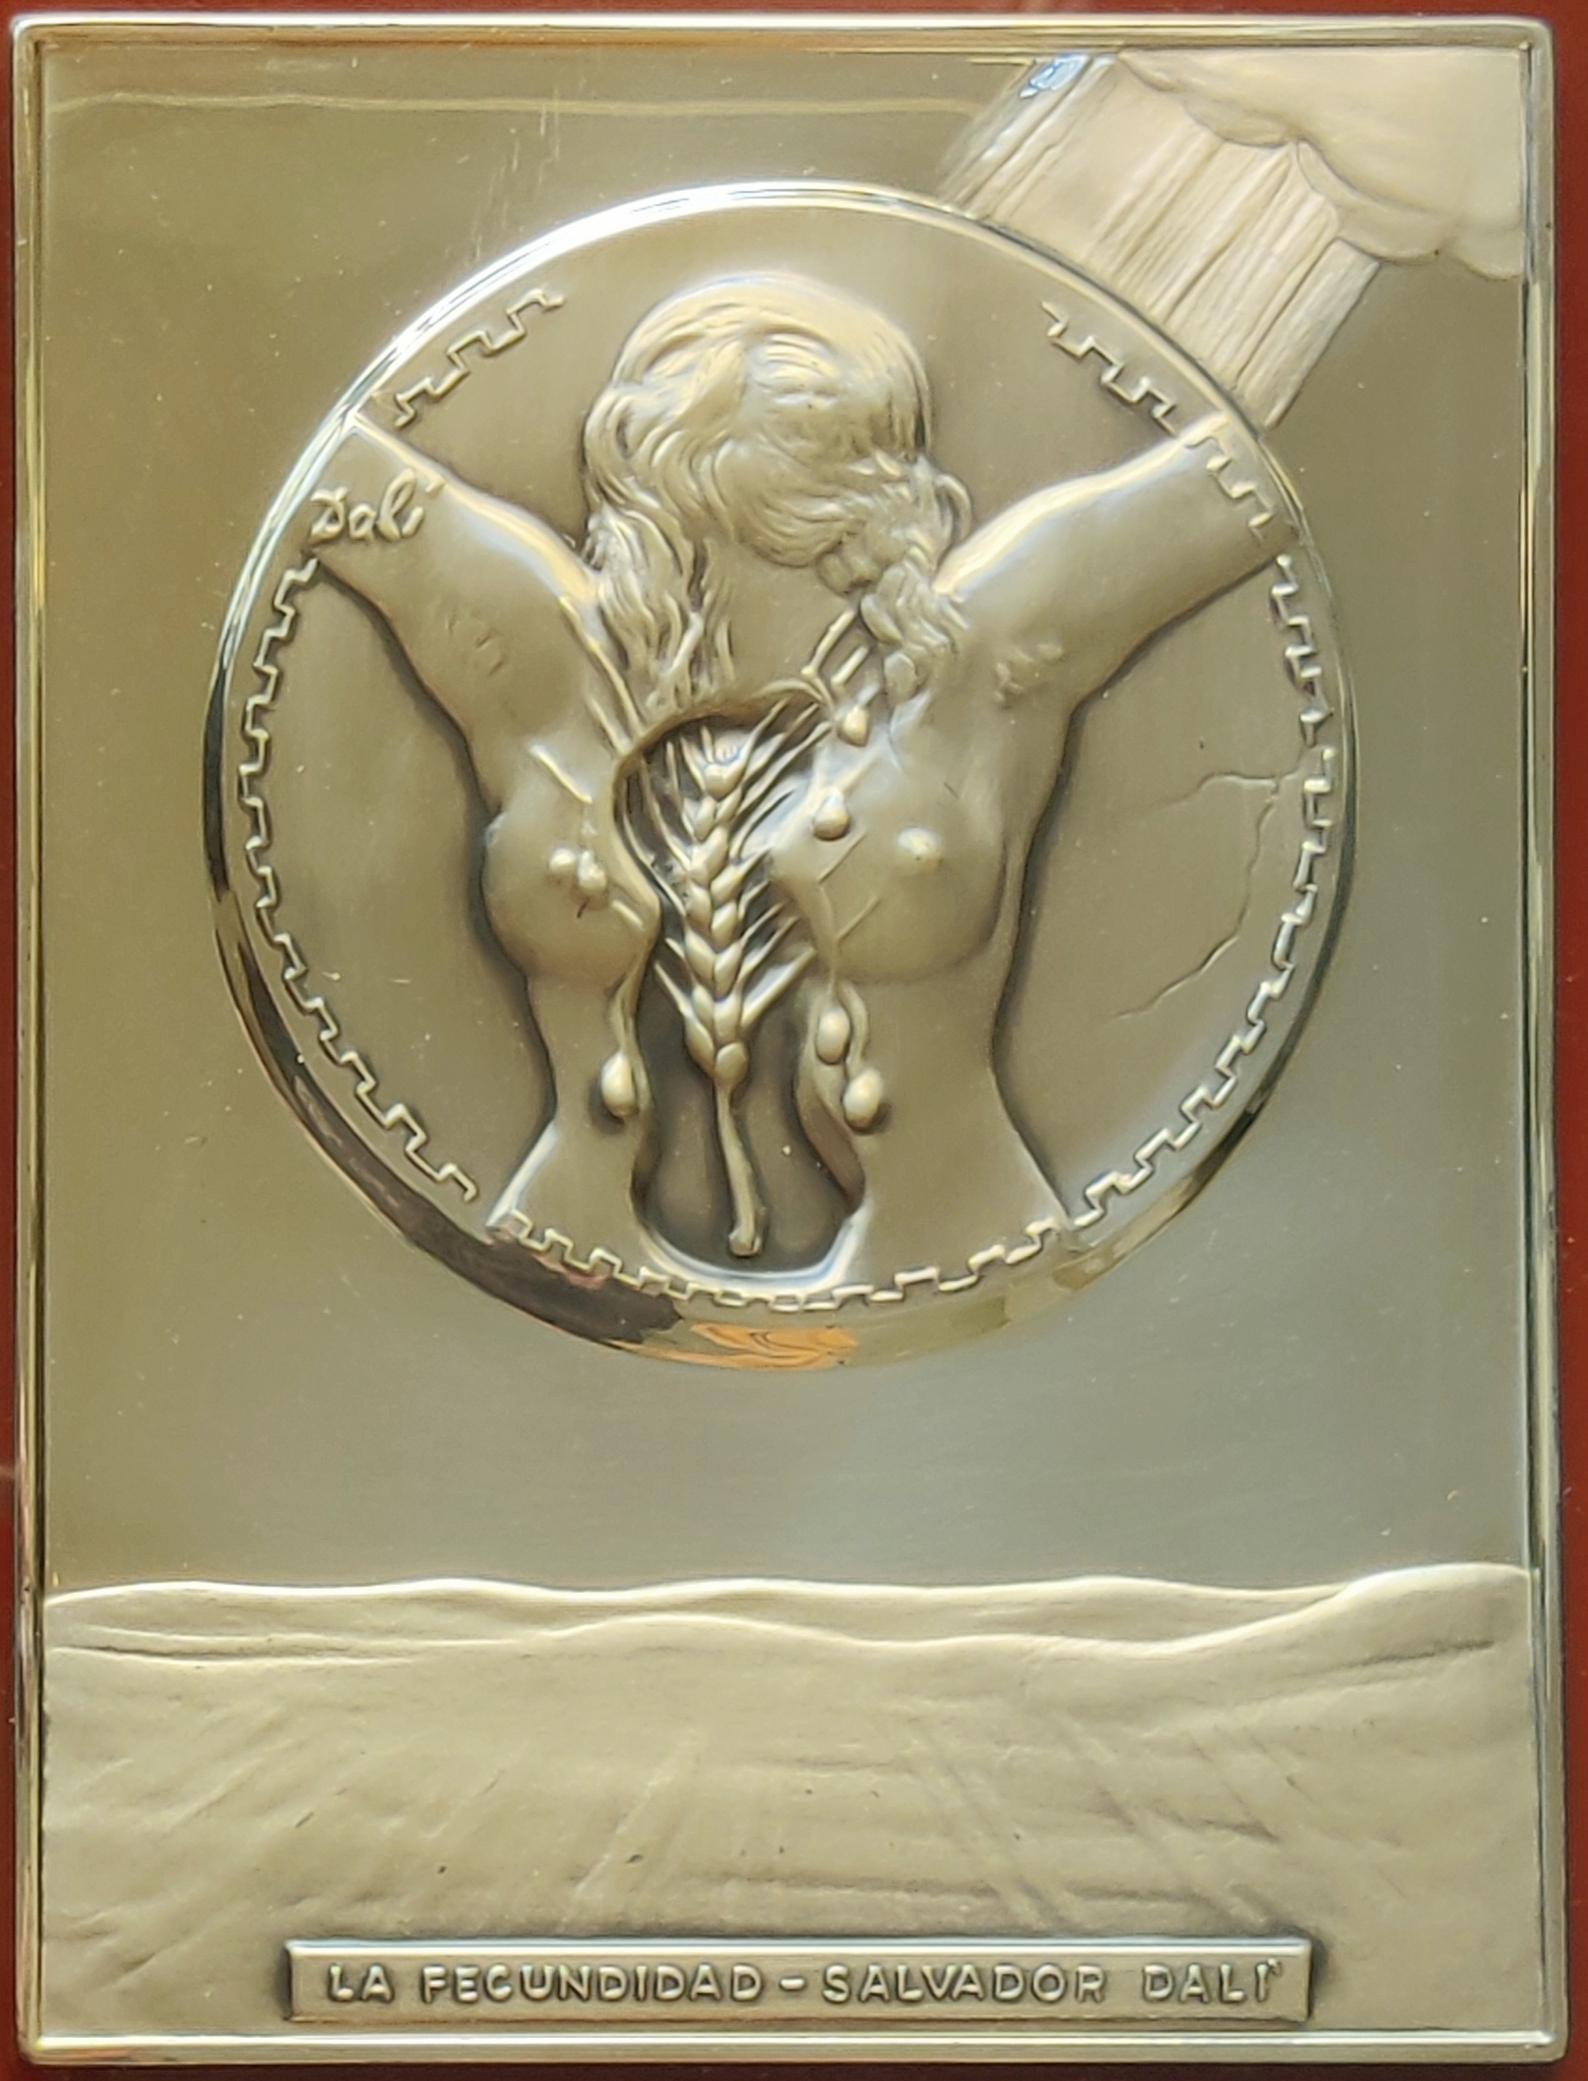 Salvador Dali 
Fecundity - Bas Relief Silver Sculpture, 1977
Dimensions: 24 x 18 cm
Framed: 38 x 33 cm
Signed on the bas relief and printed signature on the certificate on the back.
Edition number: I/564
This limited edition plaque was mounted to